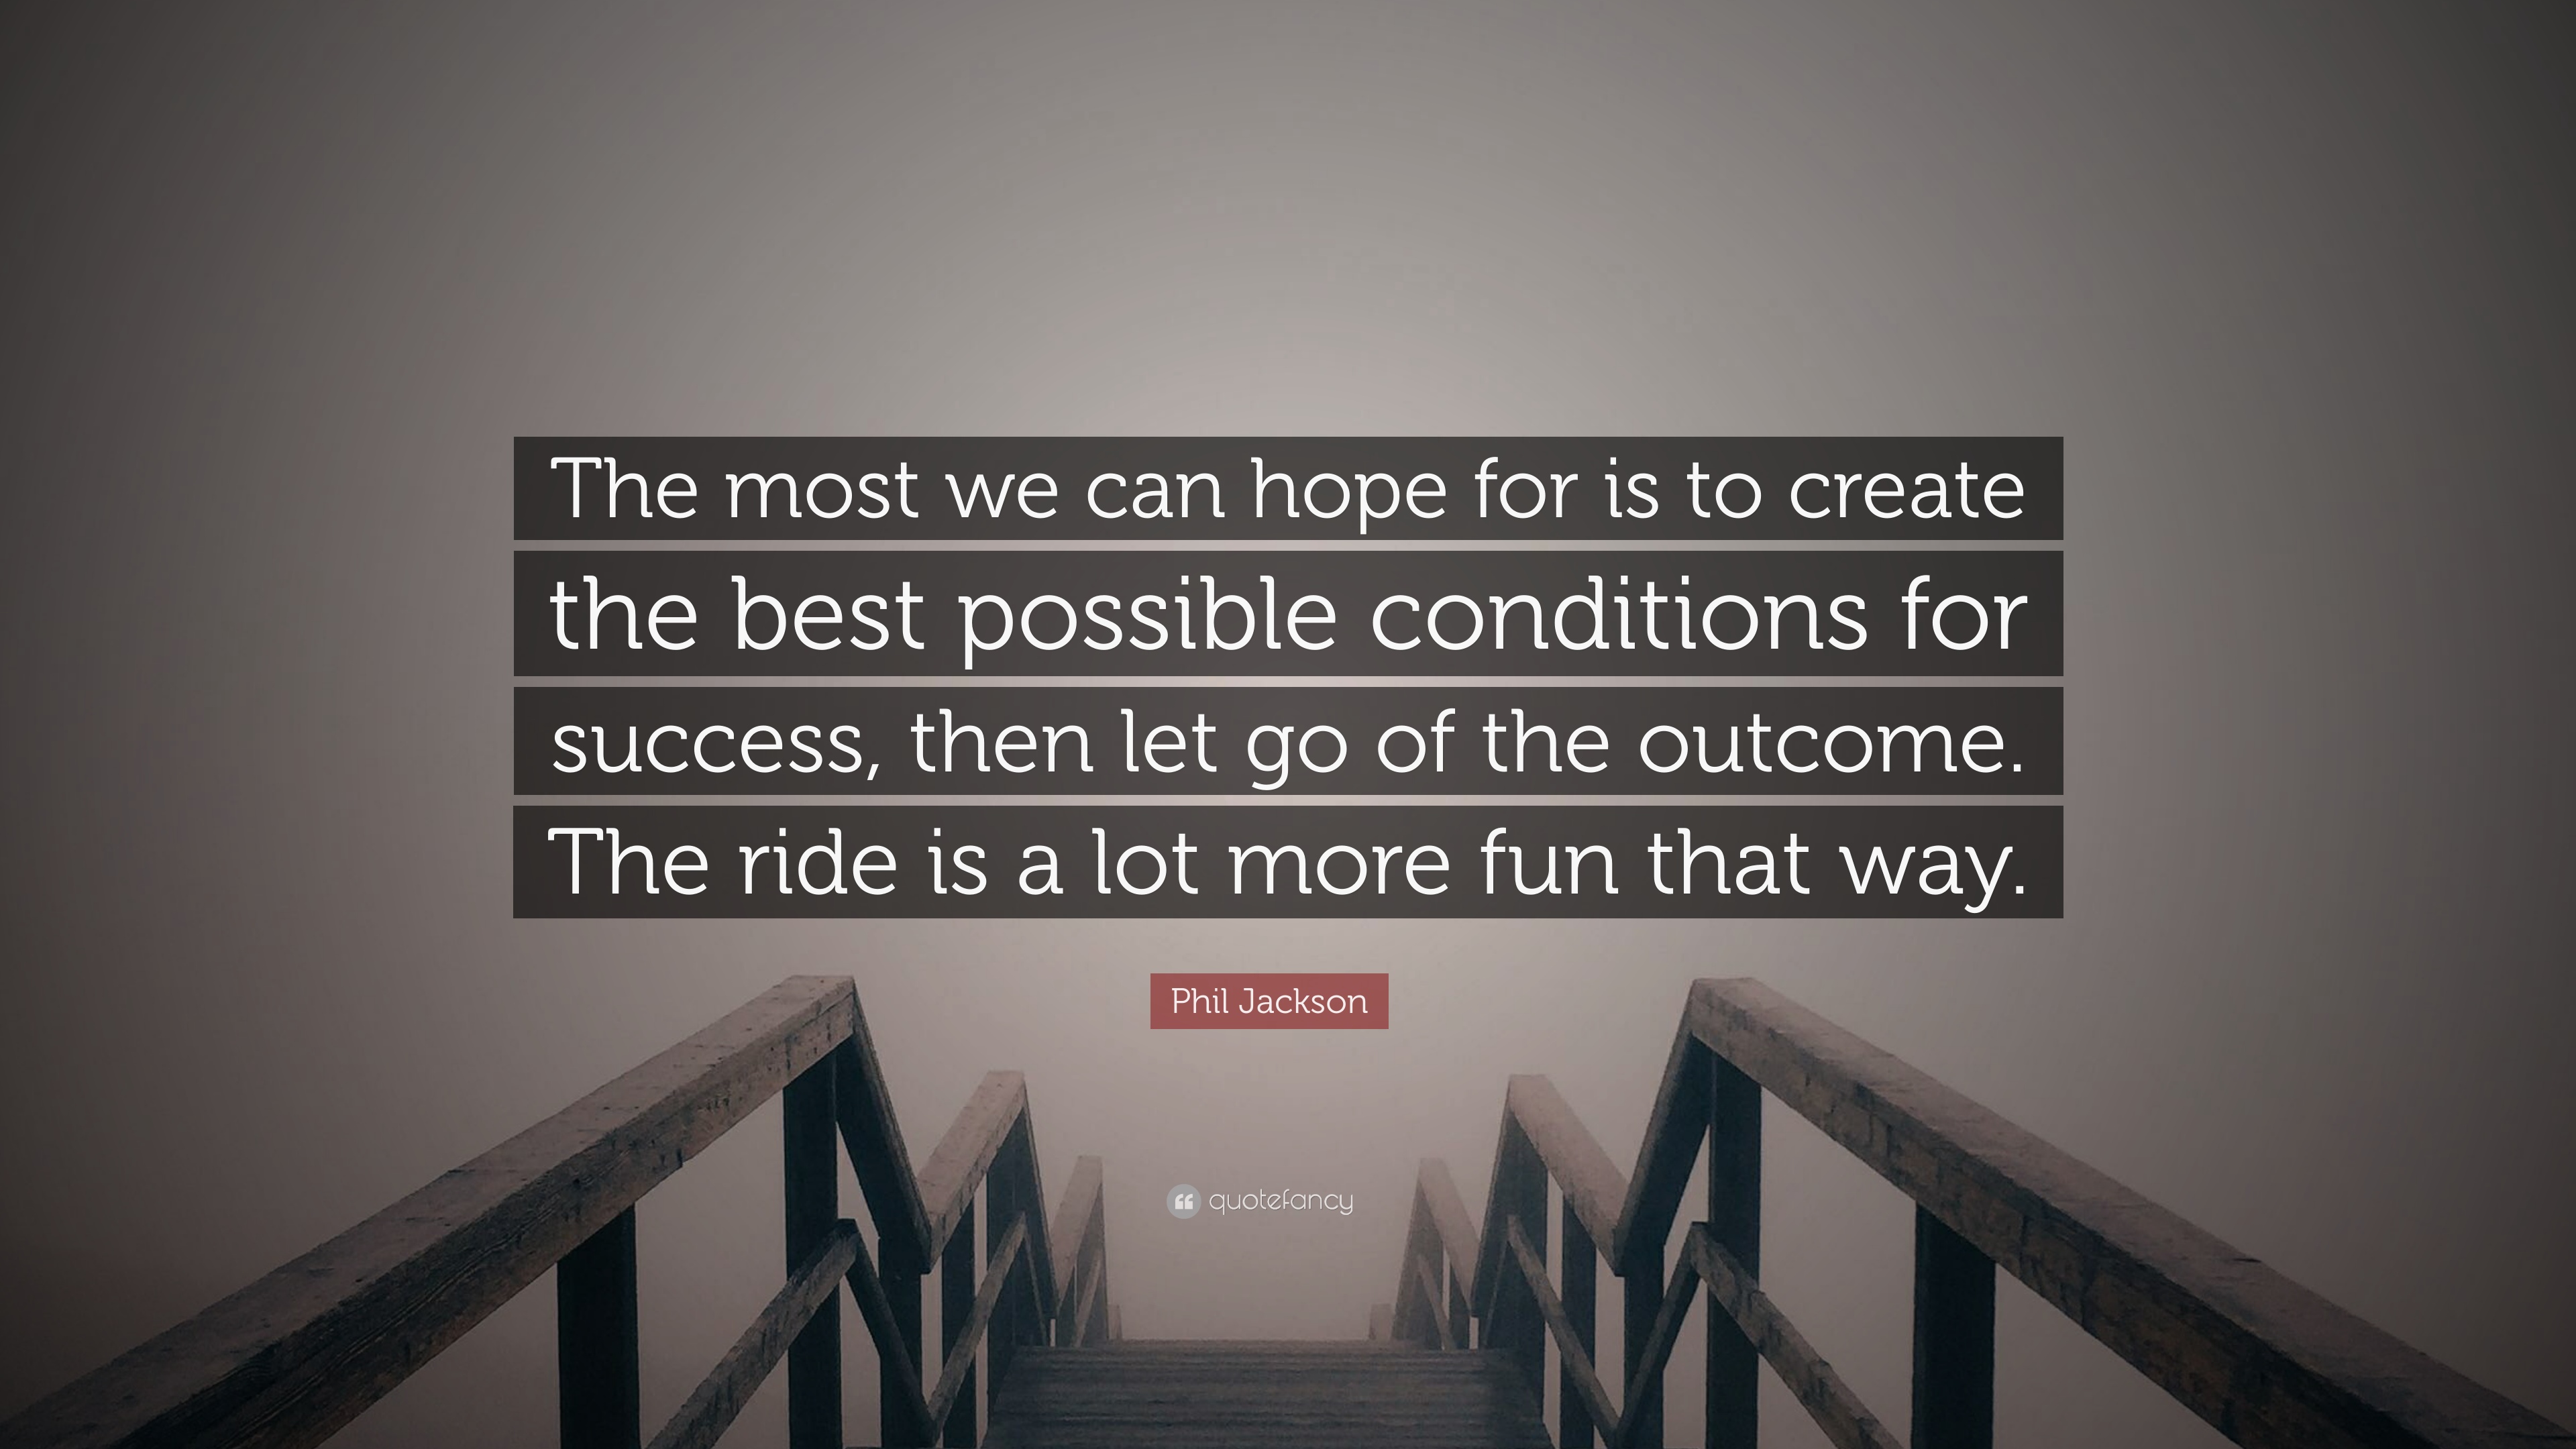 Phil Jackson Quote: “The most we can hope for is to create the best possible conditions for success, then let go of the outcome. The ride is .”